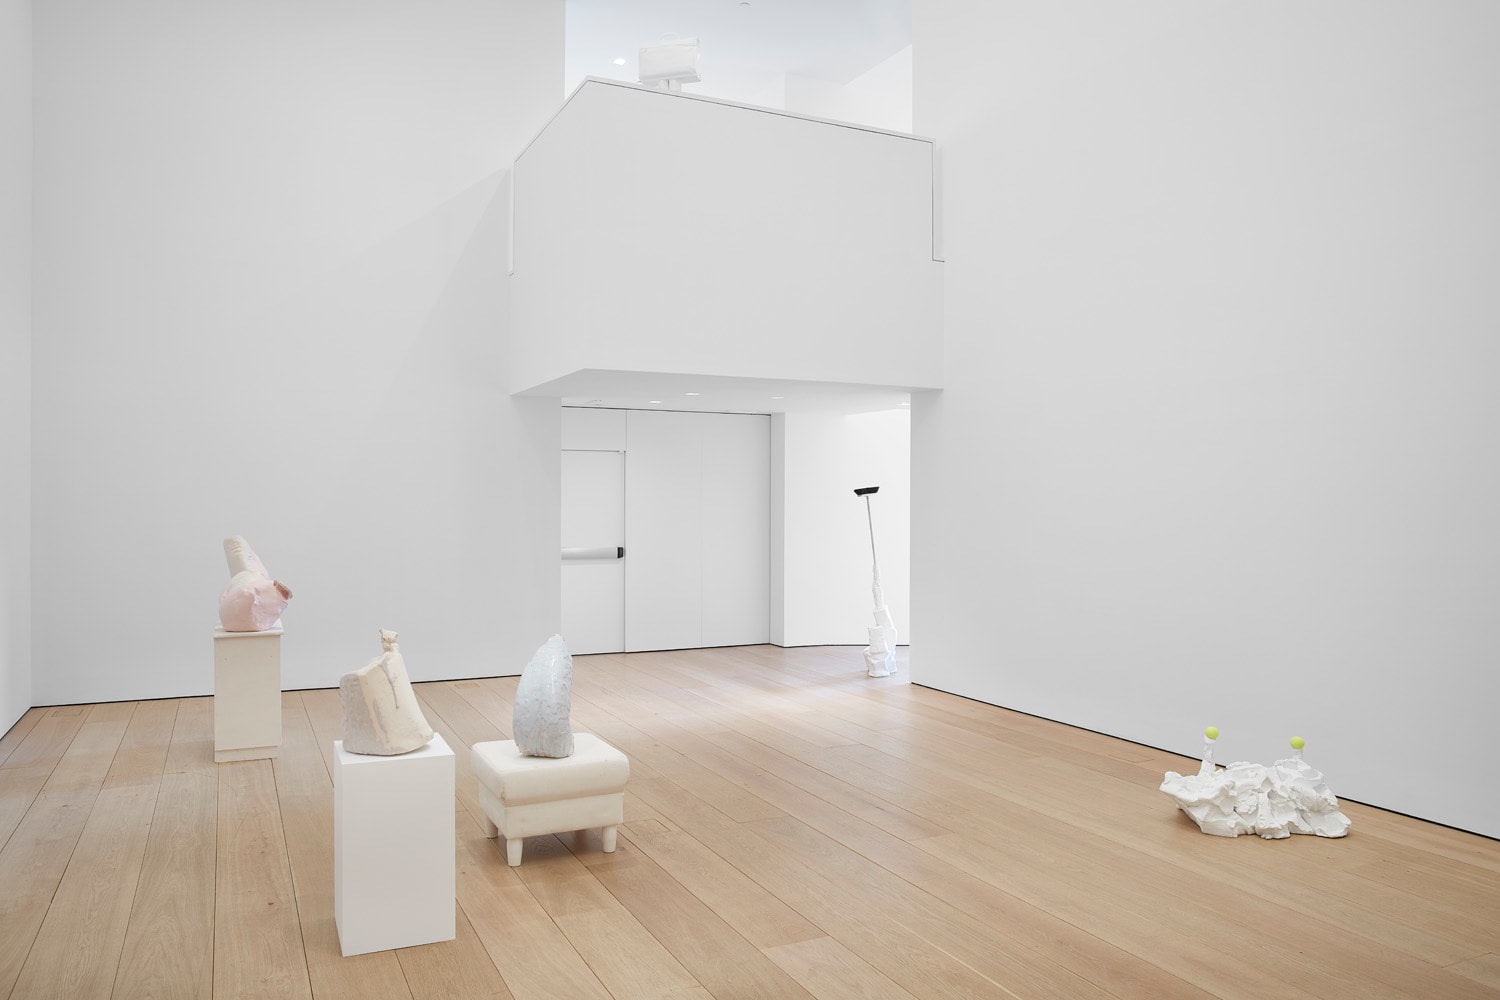 Installation view of Erwin Wurm's exhibition Yes Biological at Lehmann Maupin, New York, 2020, View 2